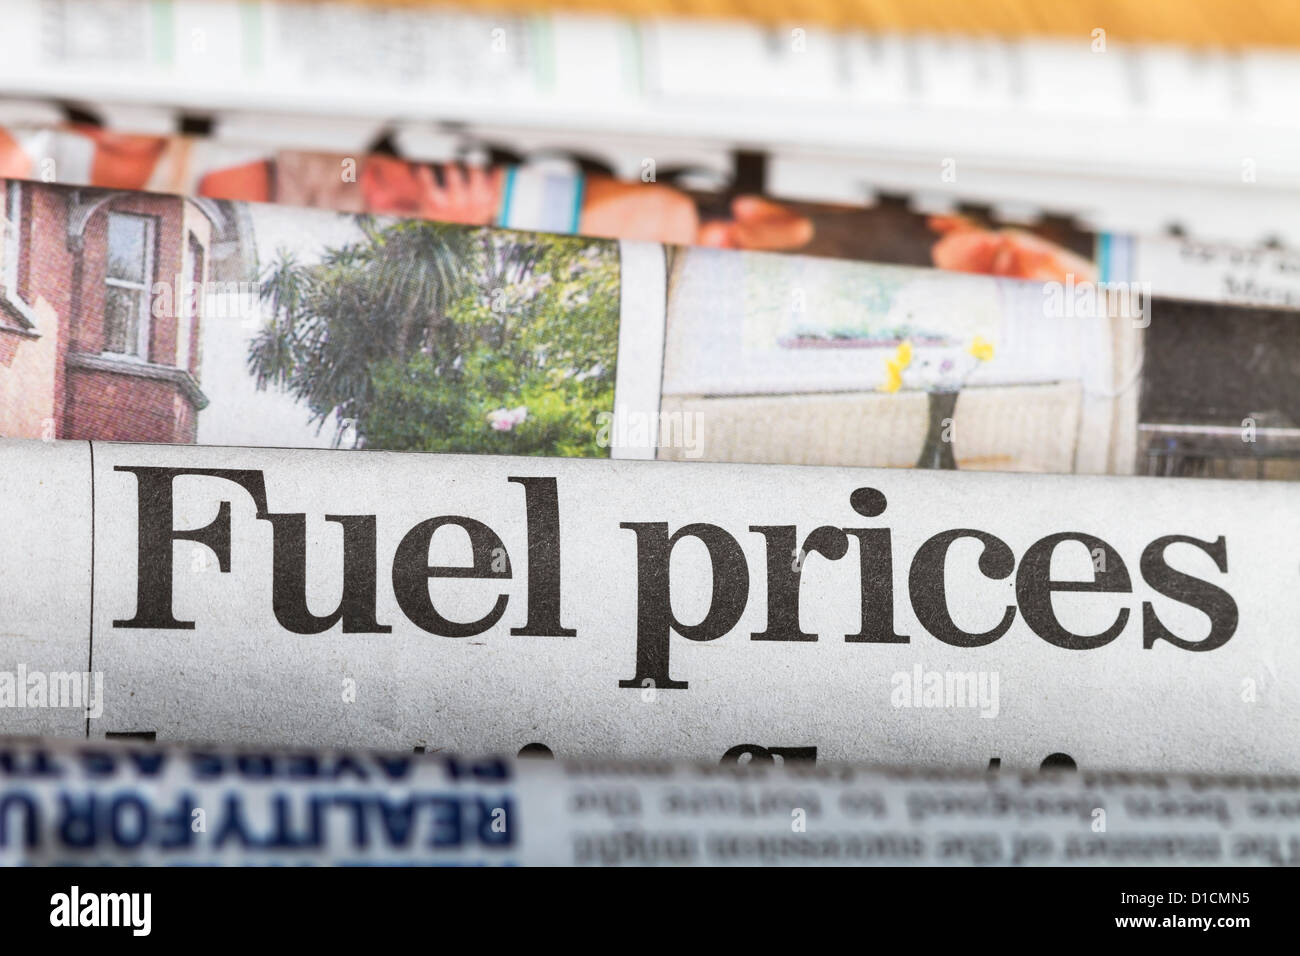 Newspapers stacked up with headline about fuel prices in the center of the image. Stock Photo